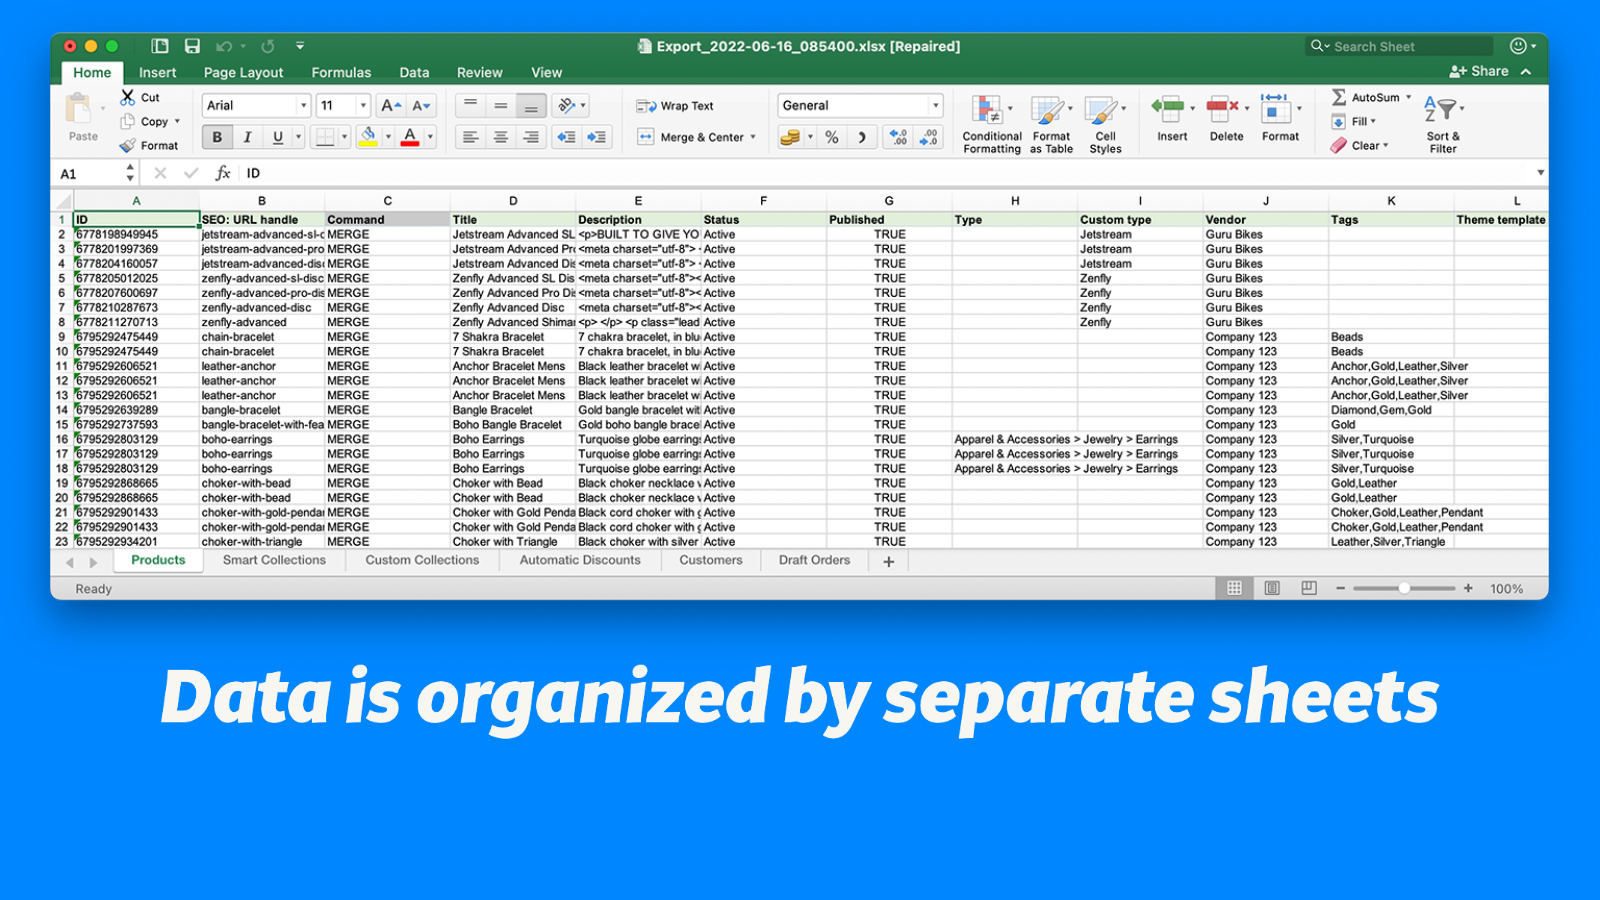 Data is organized by separate sheets